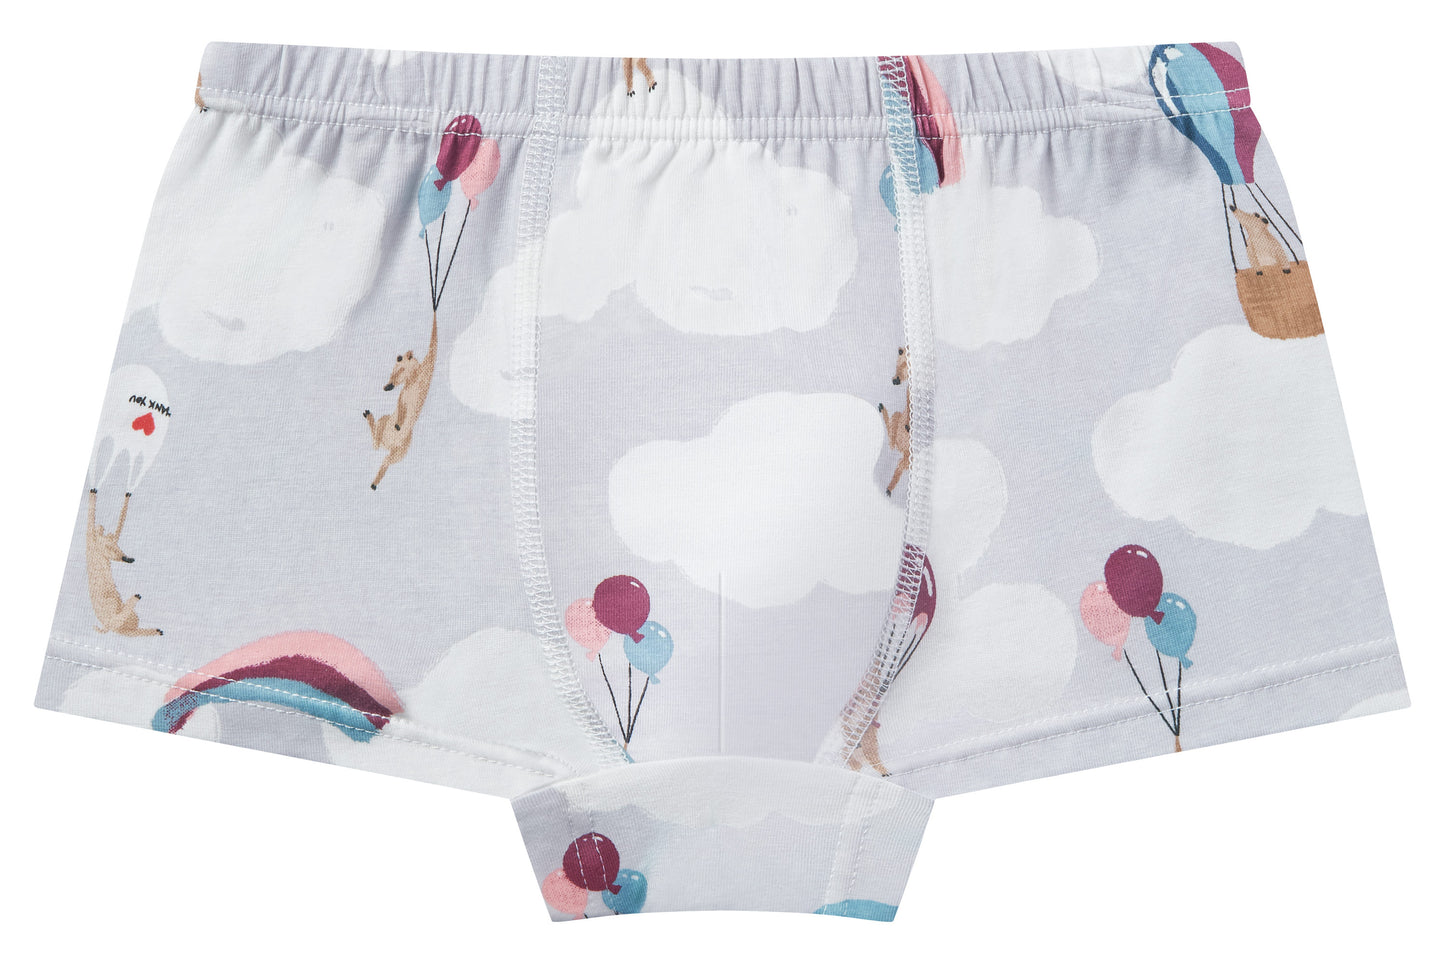 Boys Boxer Briefs Underwear (Bamboo, 2 Pack) - The Hare & The Ant – Nest  Designs